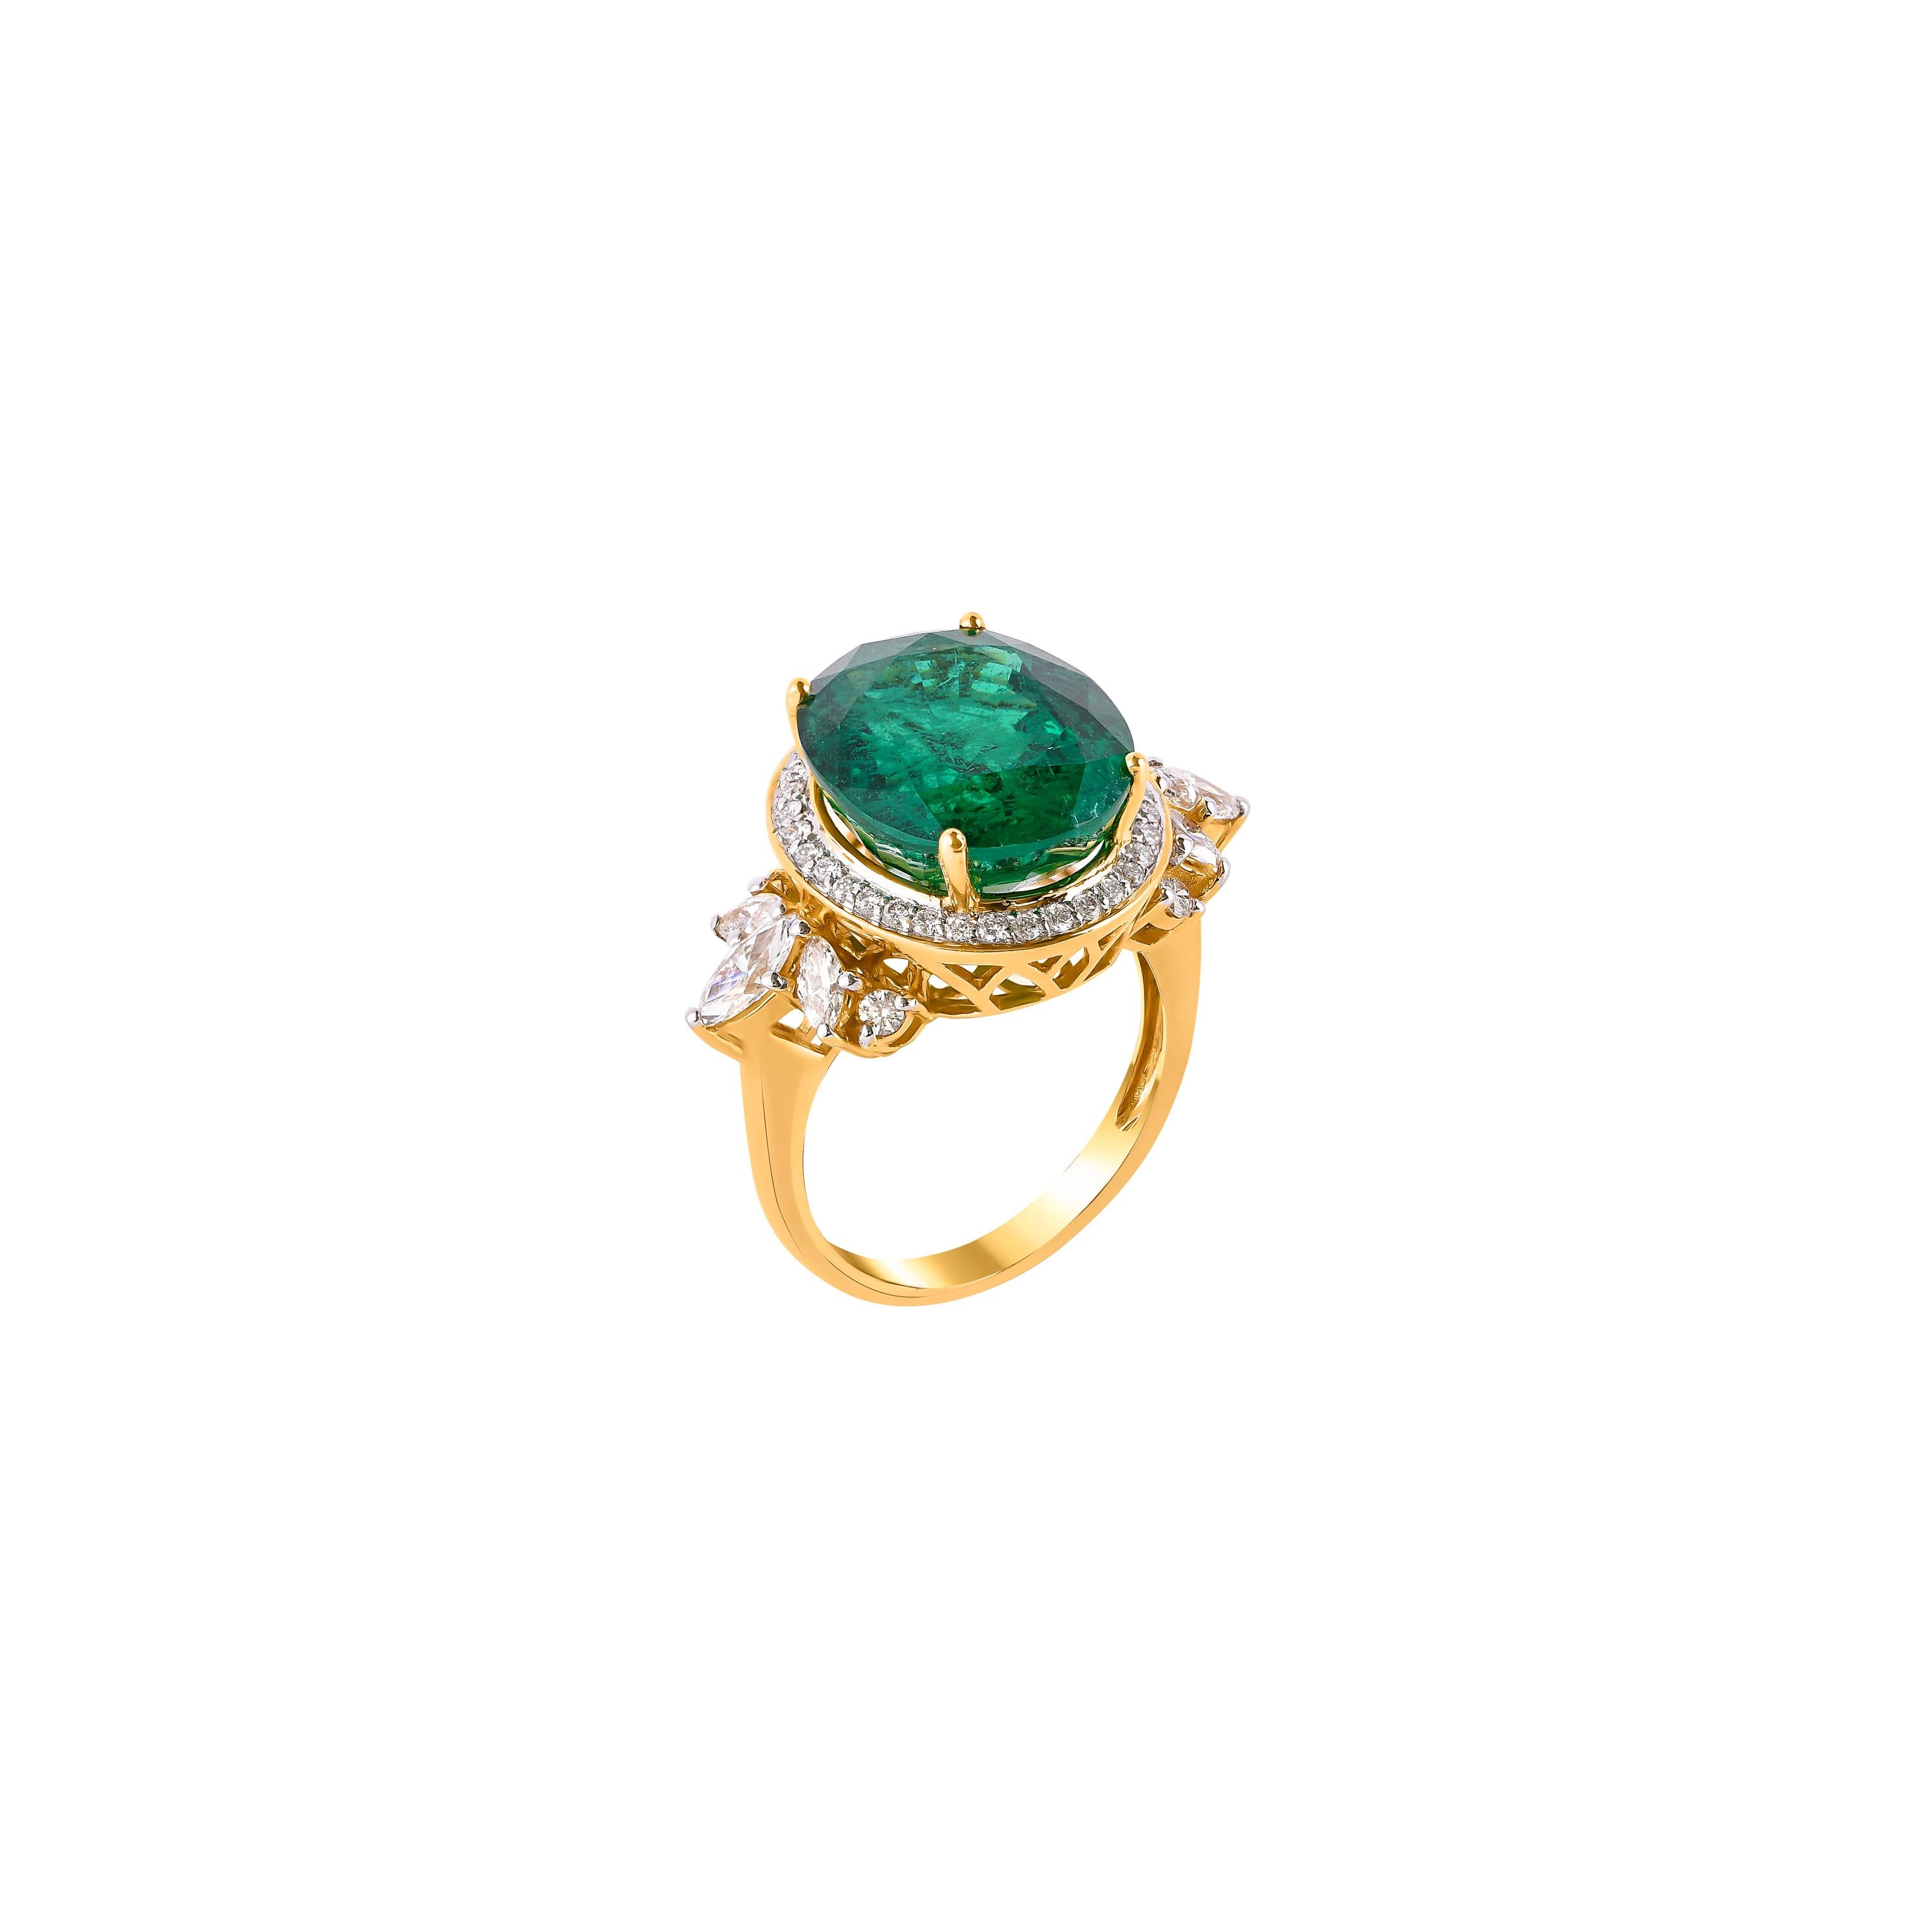 Contemporary GRS Certified 9.6 Carat Zambian Emerald & Diamond Ring in 18Karat Yellow Gold For Sale